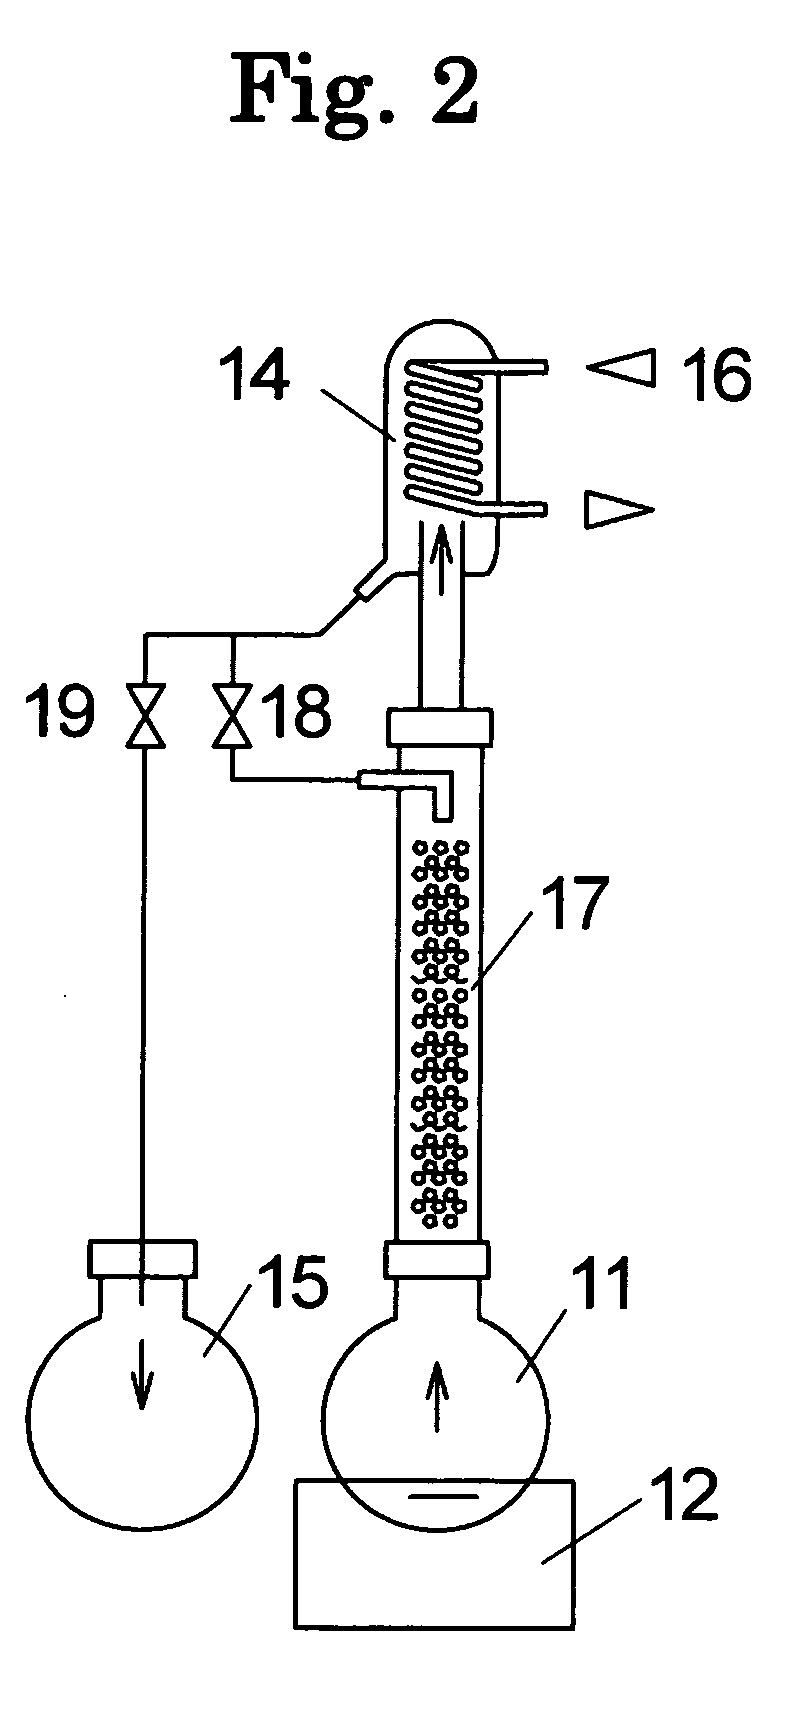 Apparatus for Gasifying and Separating a Liquid Medium or the Like